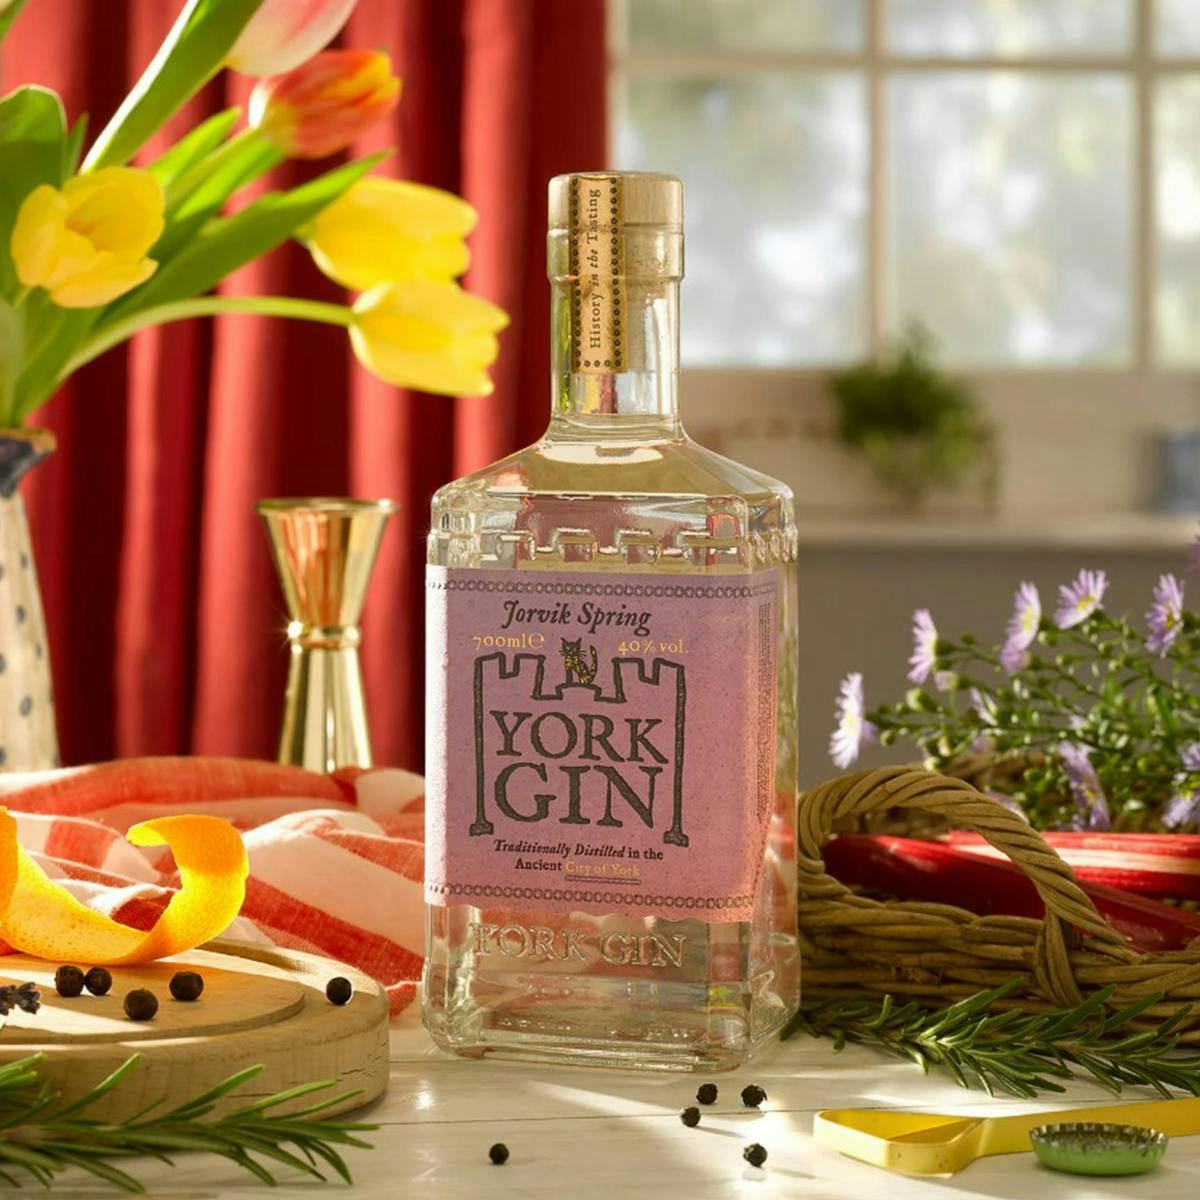 A bottle of York Gin's Jorvik Spring edition gin surrounded by colourful flowers